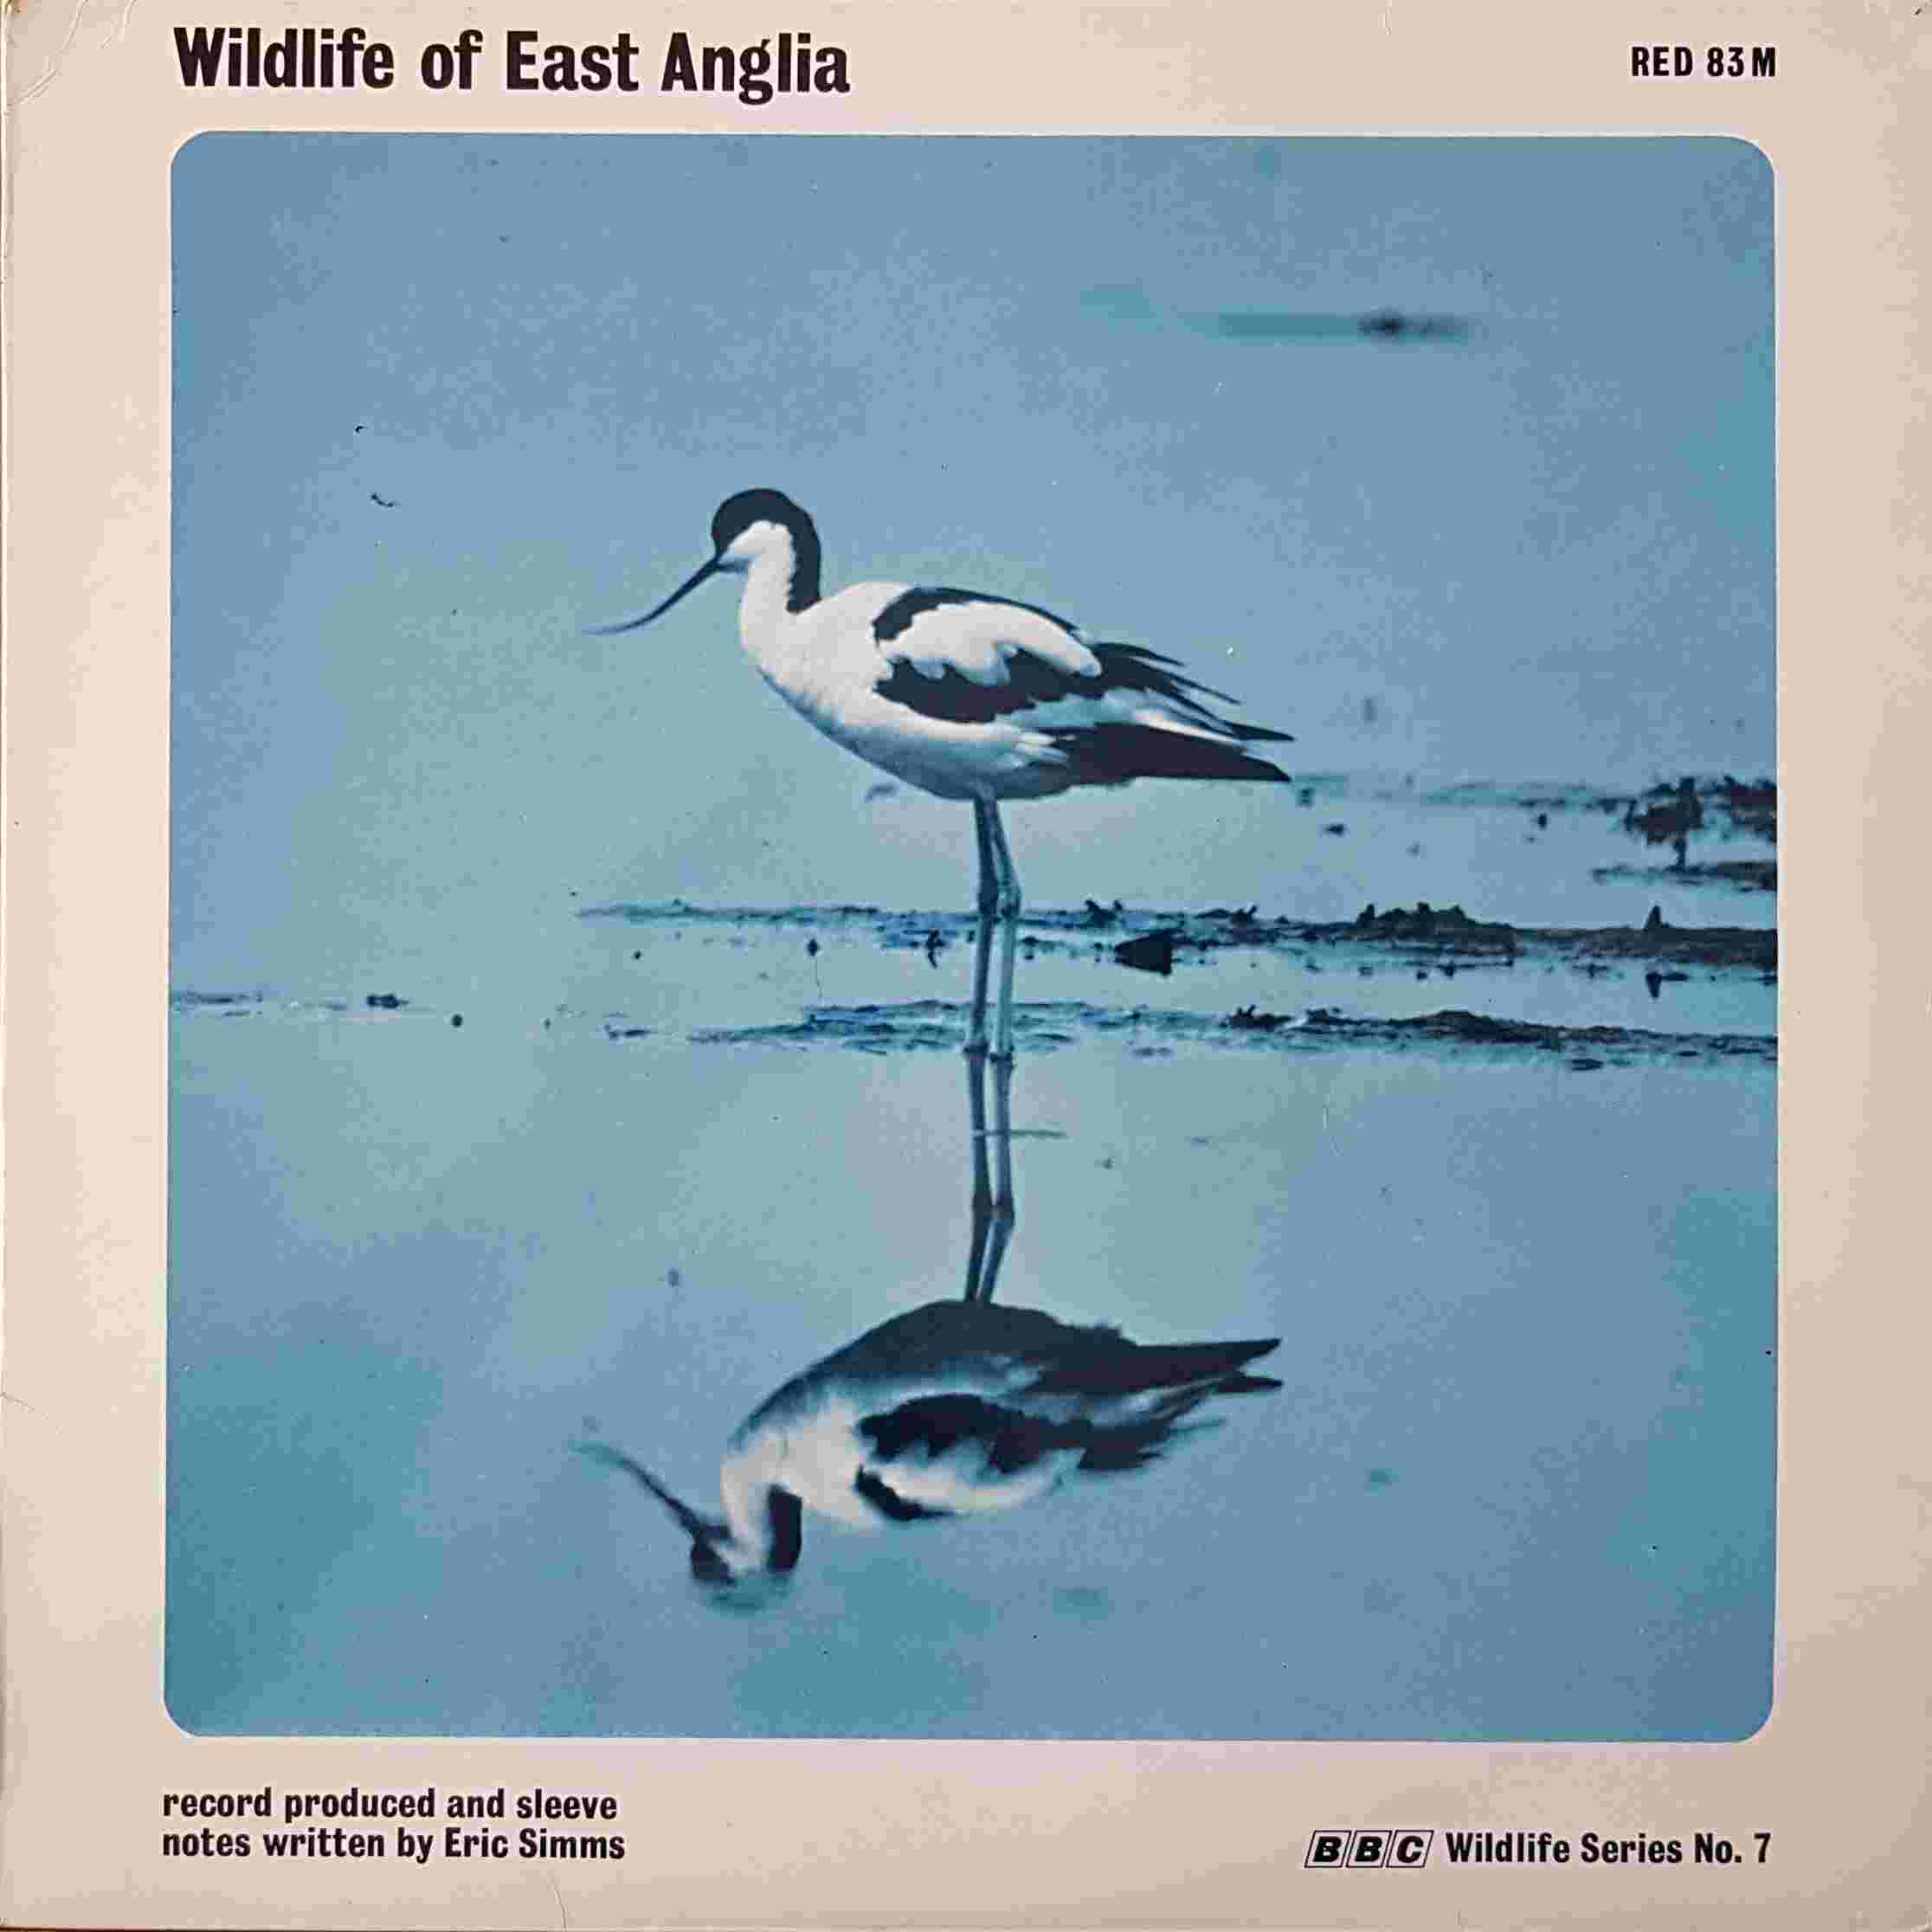 Picture of RED 83 Wildlife of East Anglia by artist Various from the BBC records and Tapes library